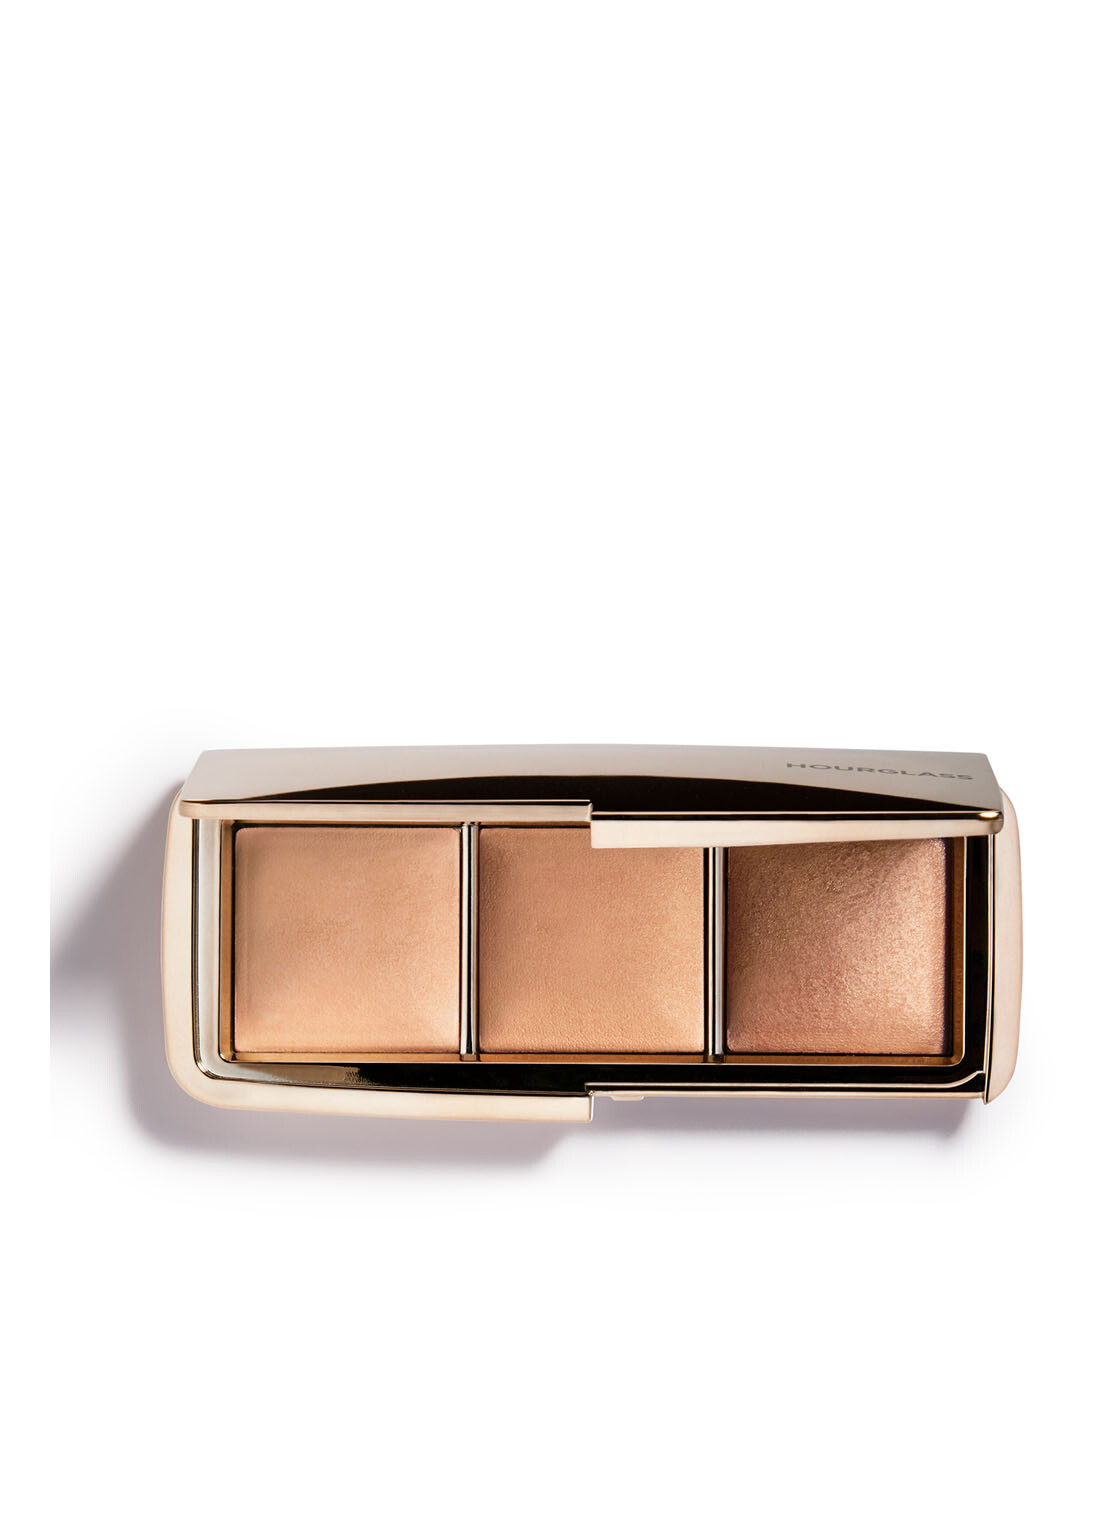 Hourglass Ambient Lighting Palette Volume II - highlighter